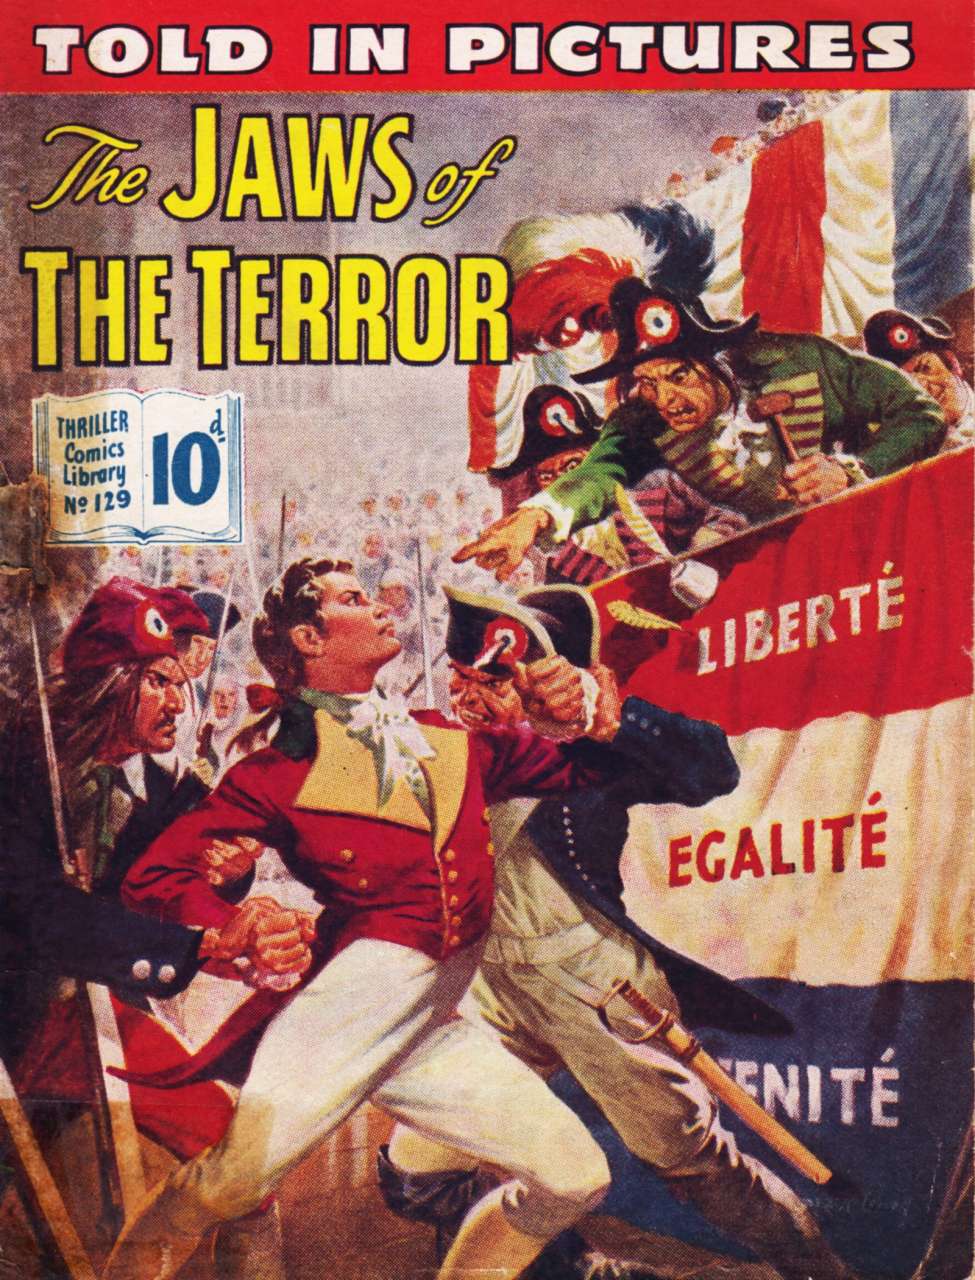 Book Cover For Thriller Comics Library 129 - The Jaws of the Terror